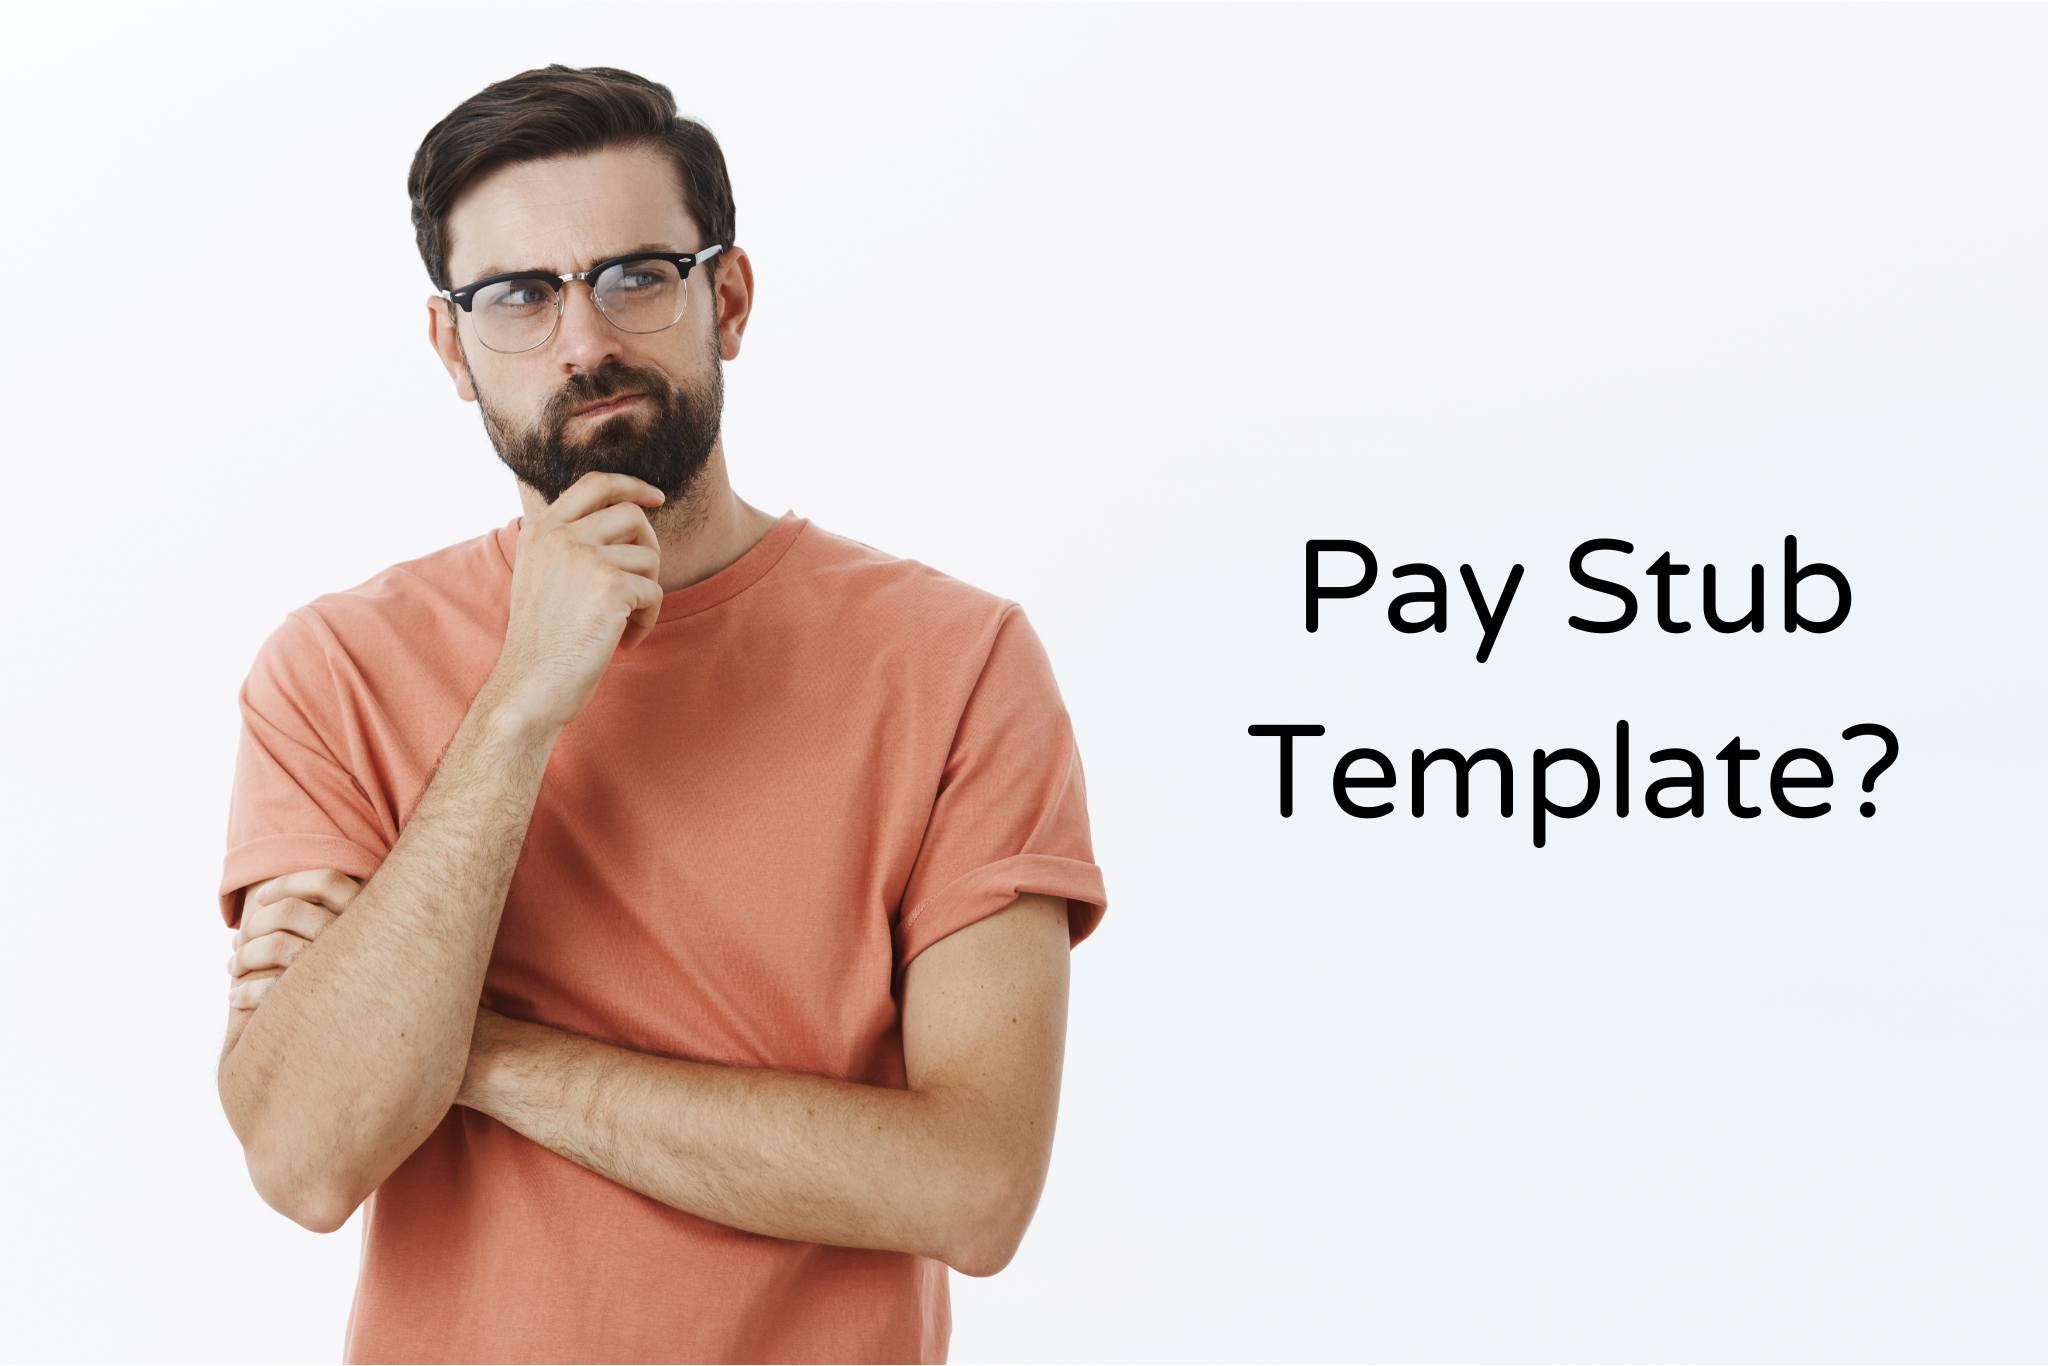 Ever Wonder What Is The Pay Stub Template